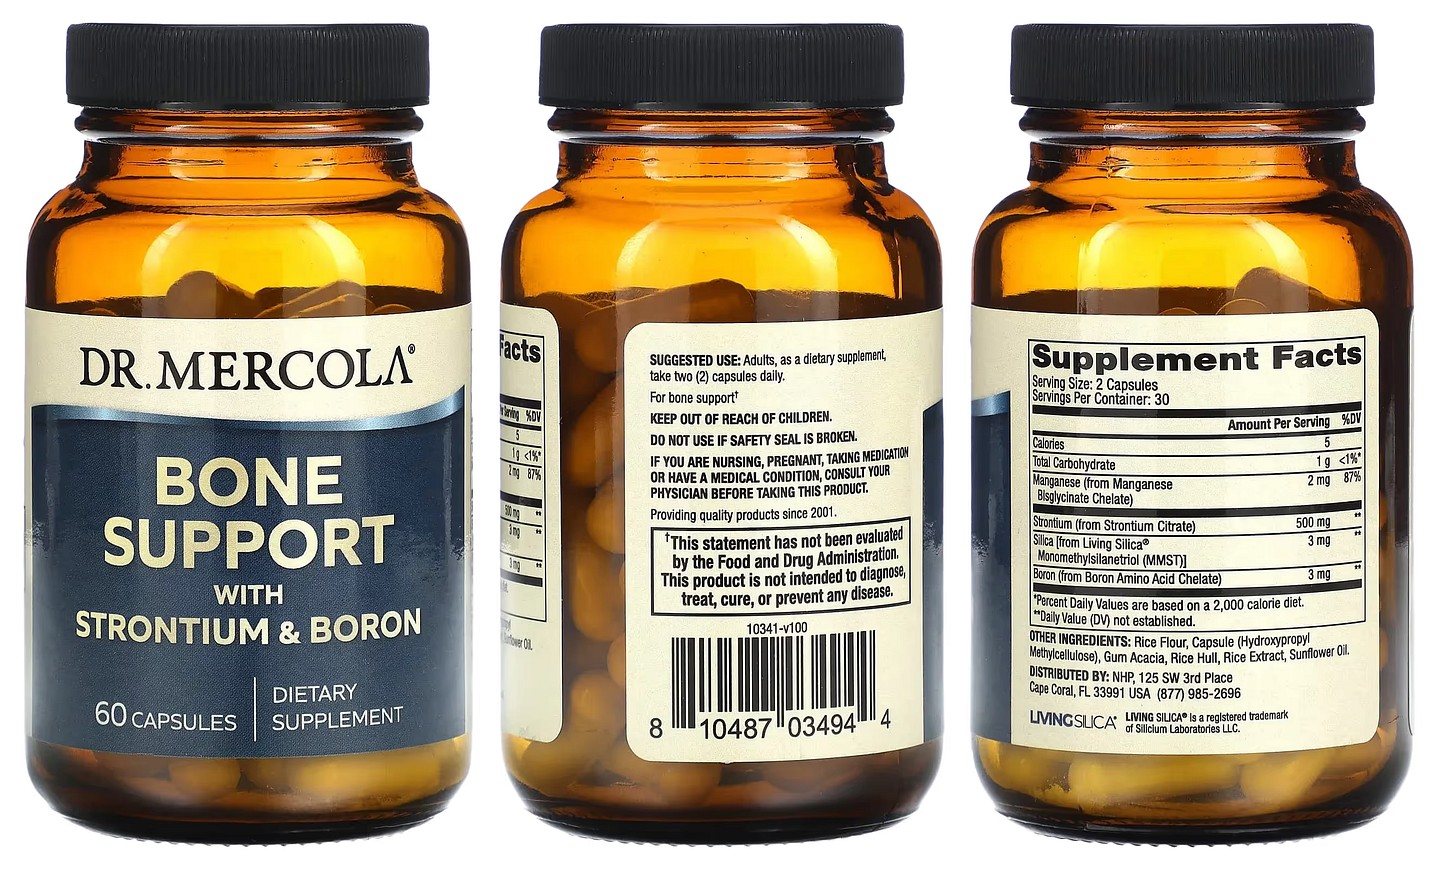 Dr. Mercola, Bone Support with Strontium & Boron packaging